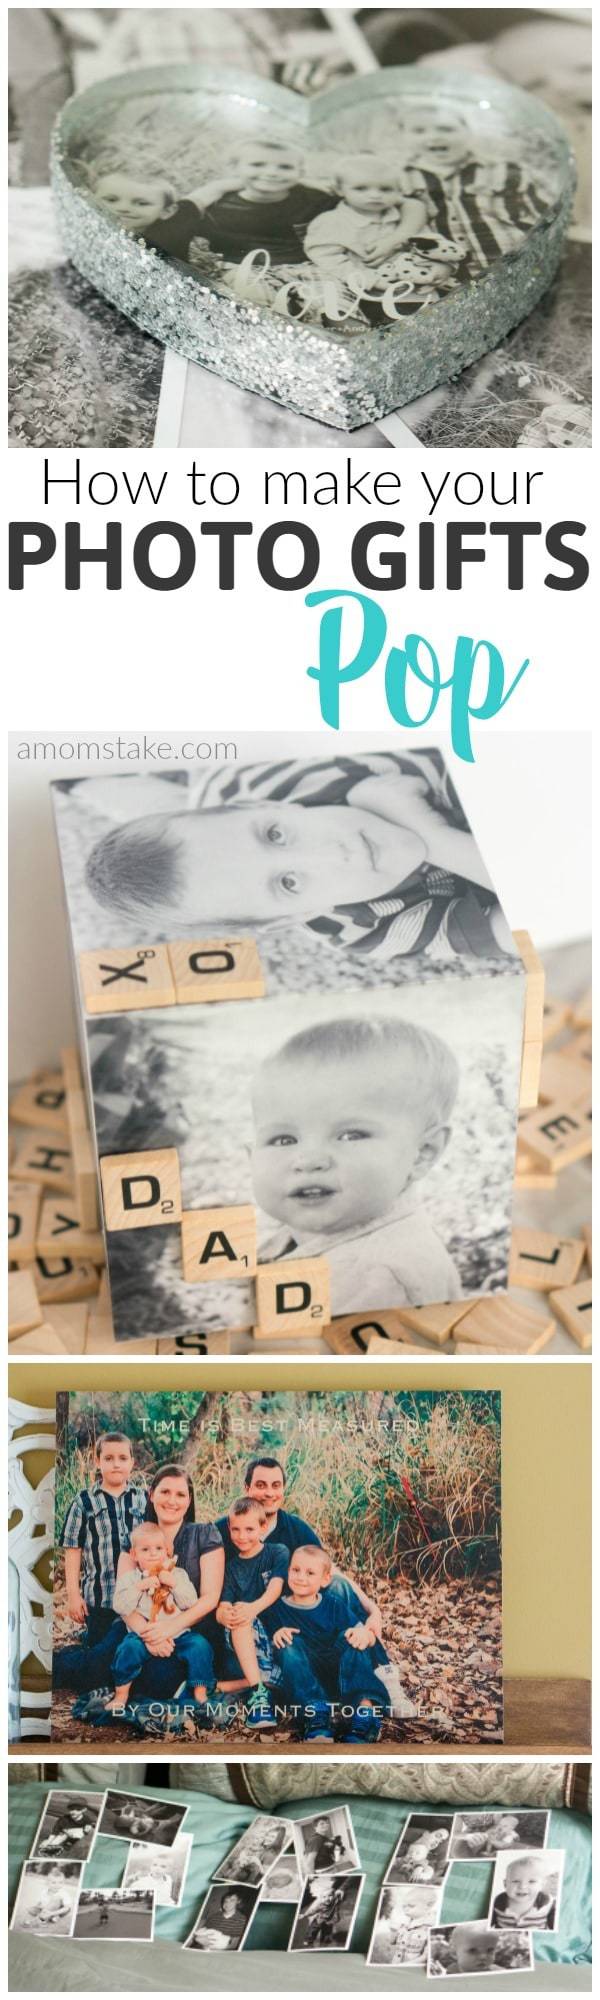 These amazing (and SO EASY) DIY ideas will take an ordinary photo gift to a personalized level in minutes (or seconds). Perfect for Father's Day or other gifts.